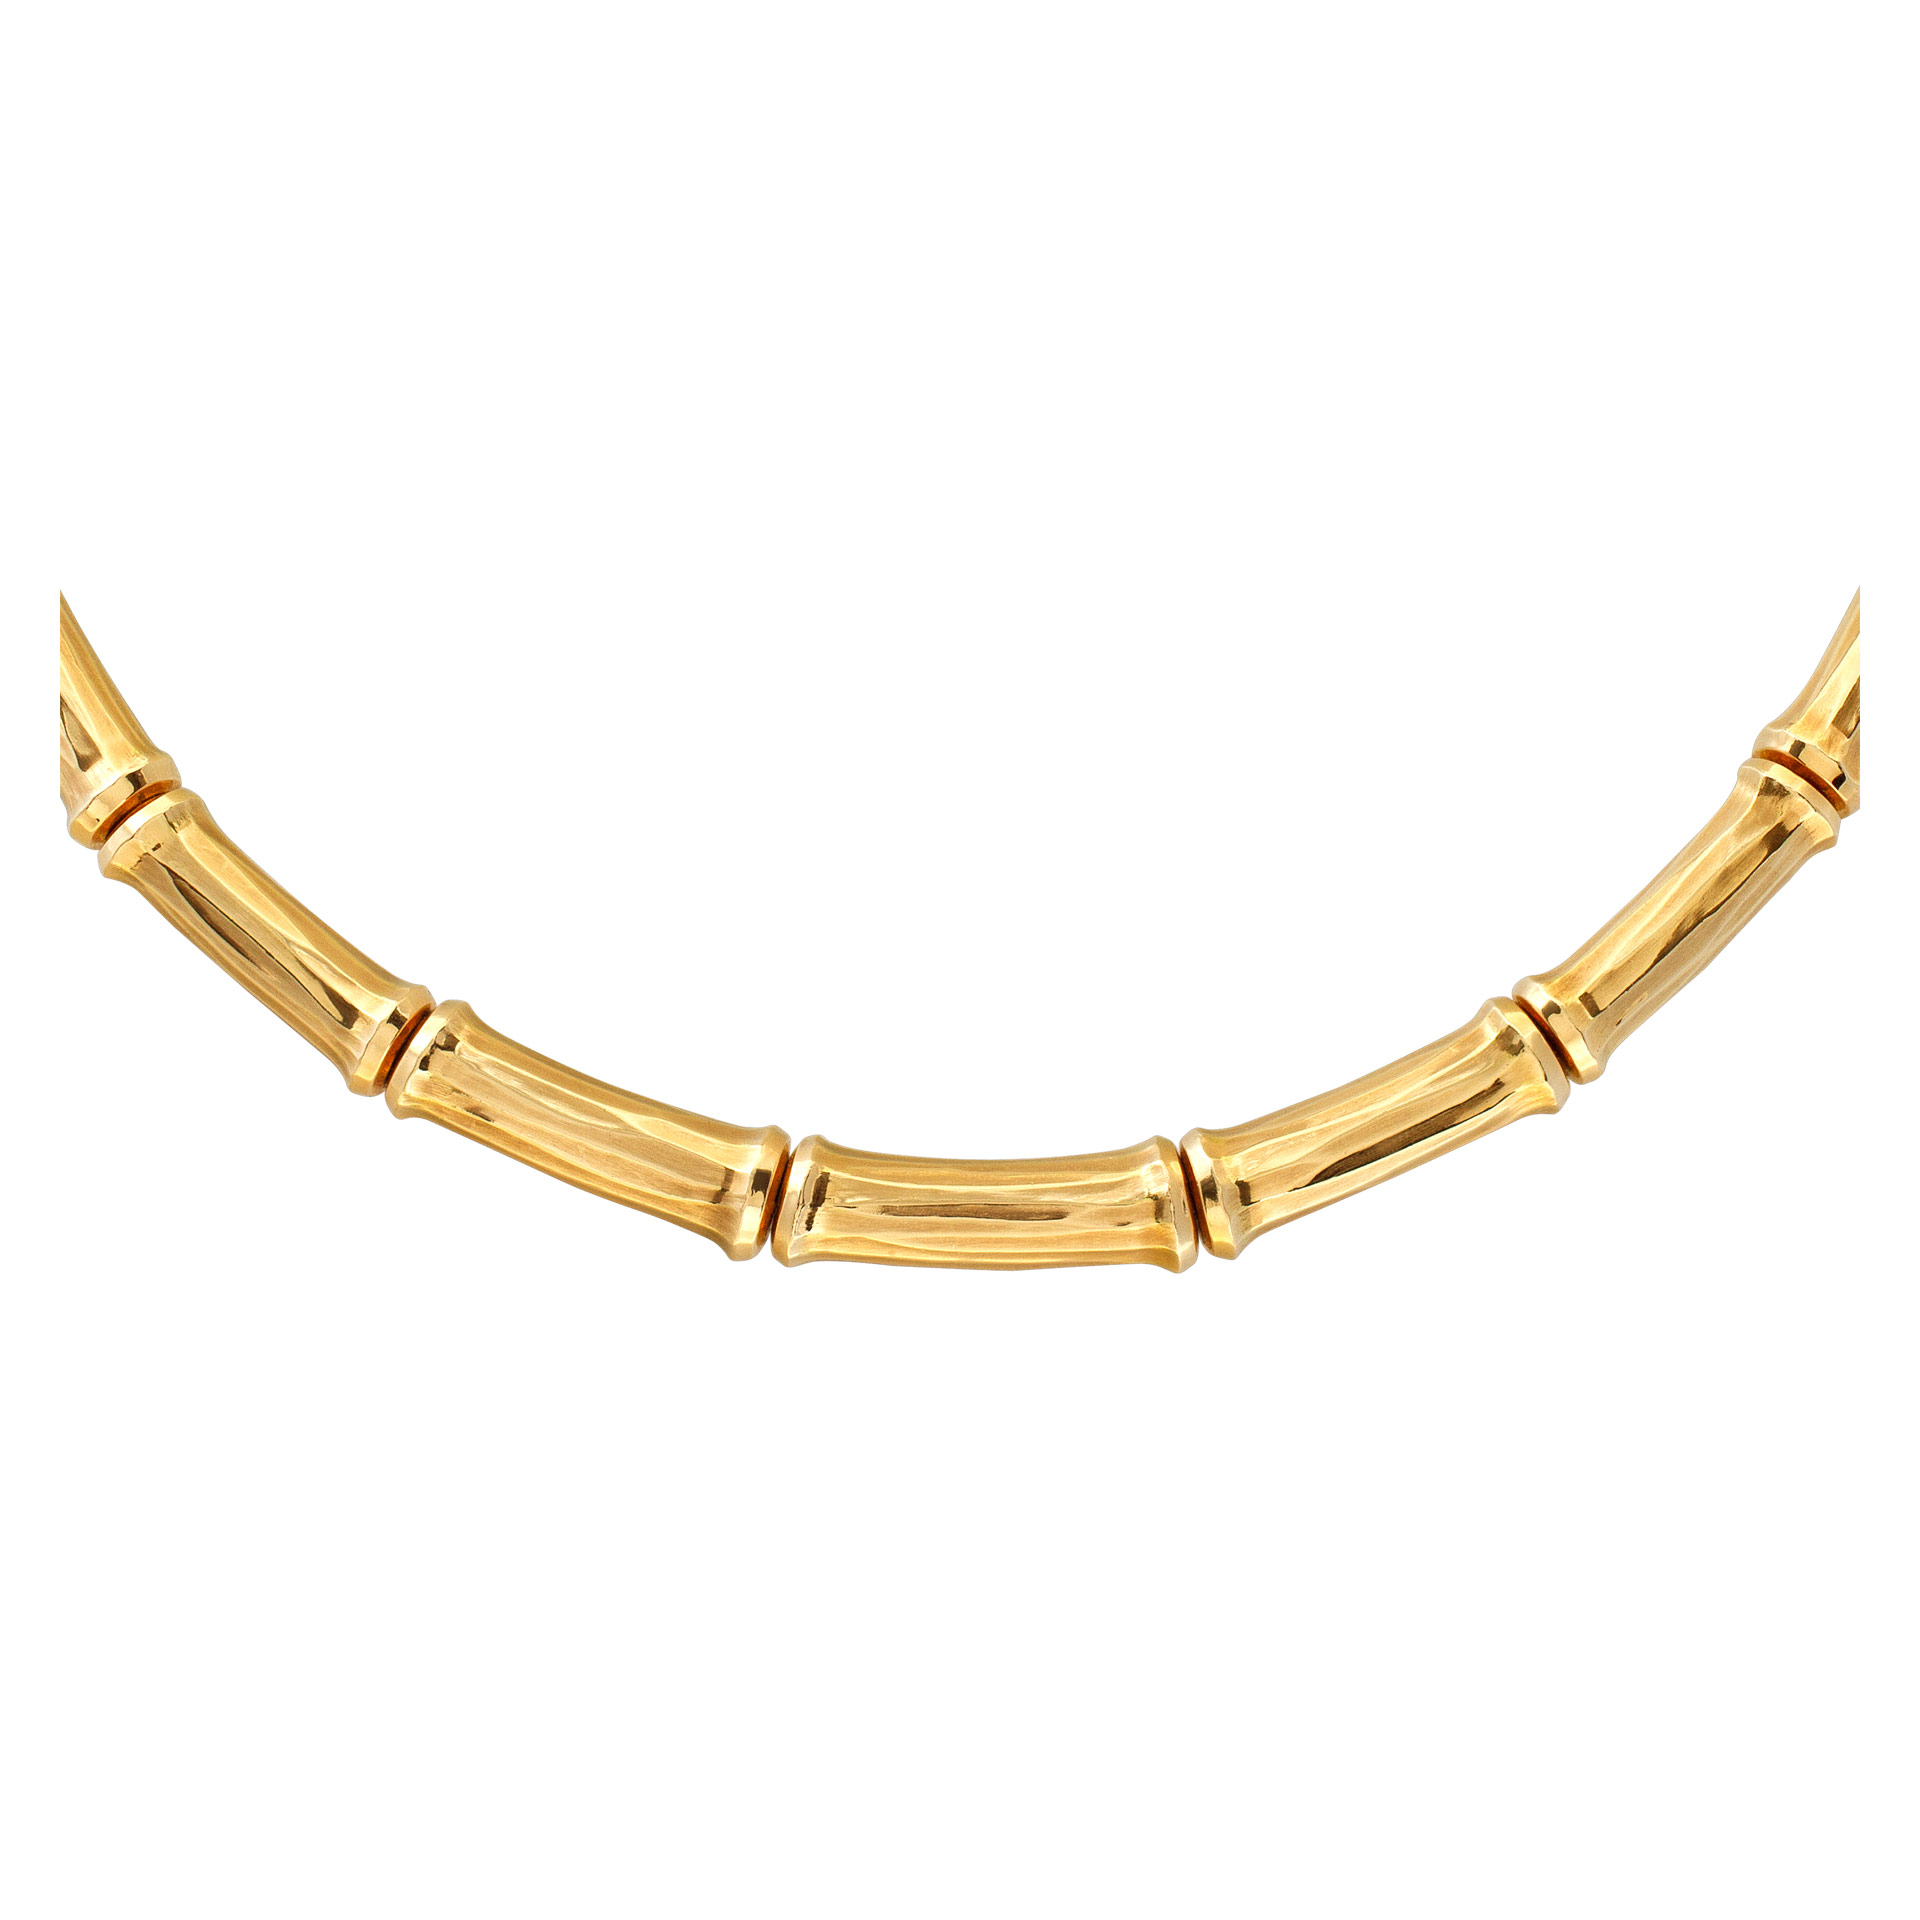 Cartier Bamboo choker/necklace in yellow gold. 16.5" length